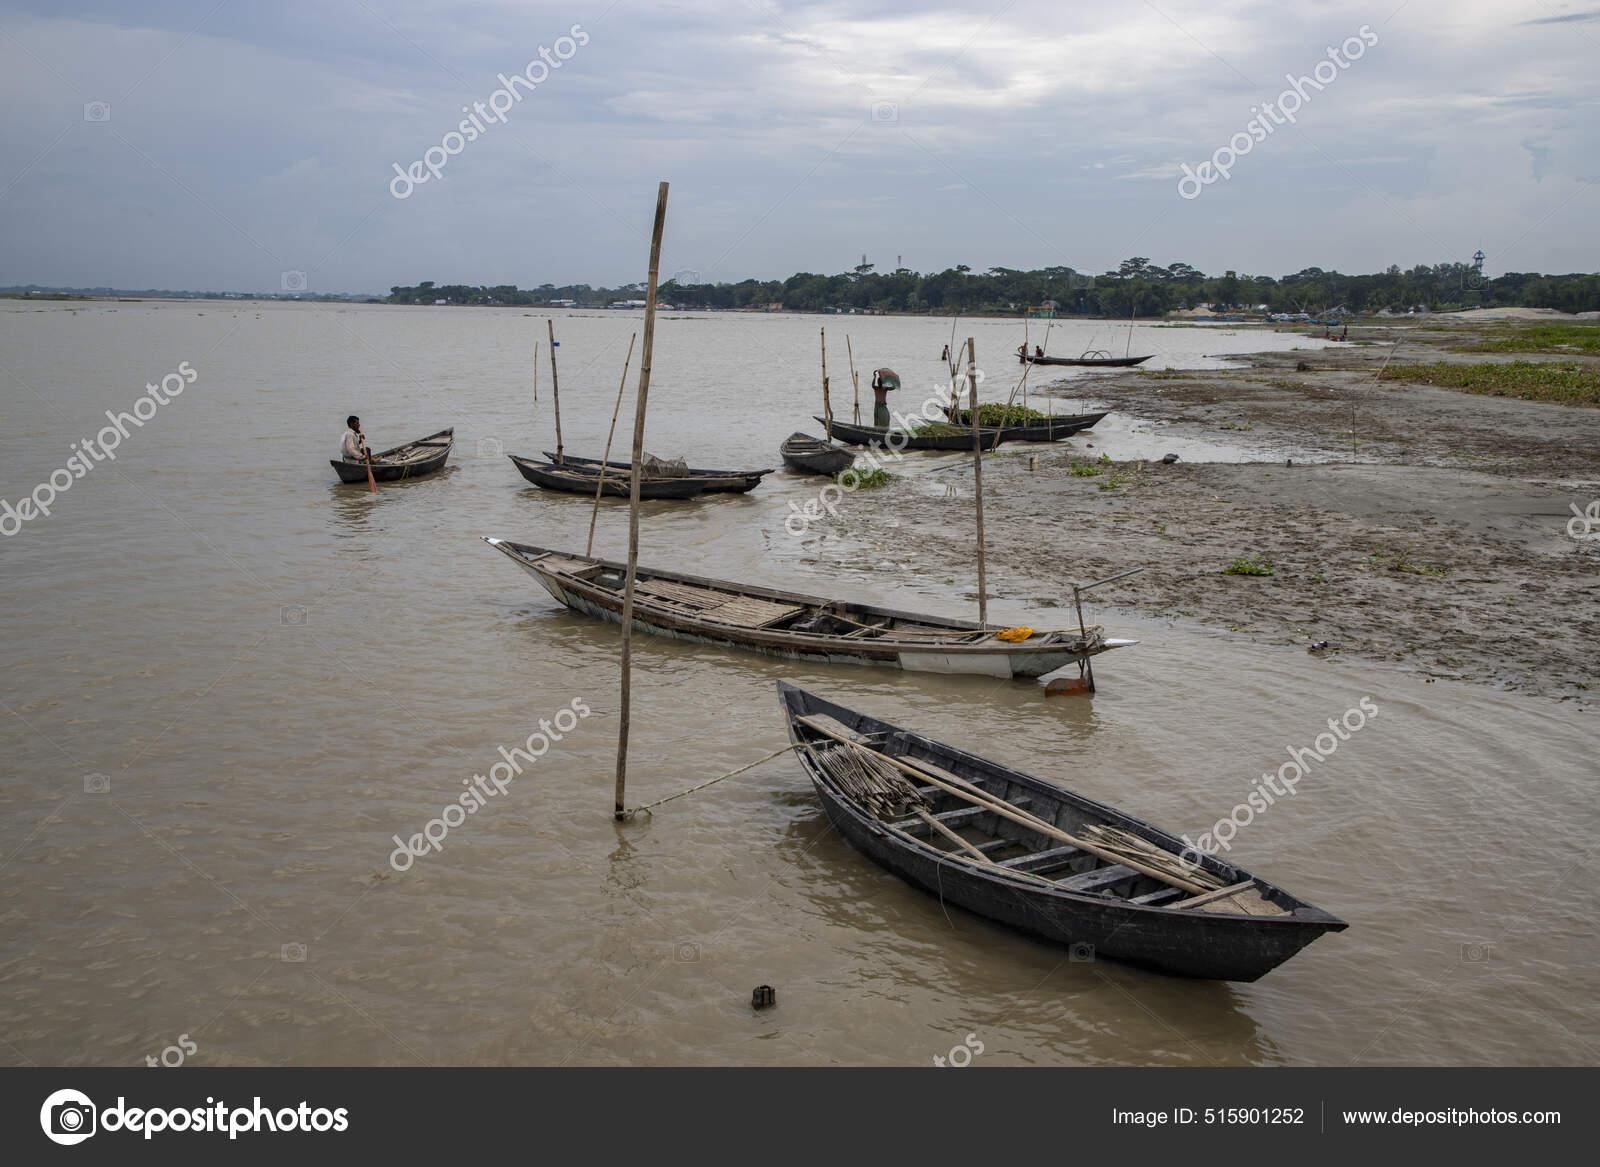 View Boats Floating River — Stock Photo © Wirestock #515901252